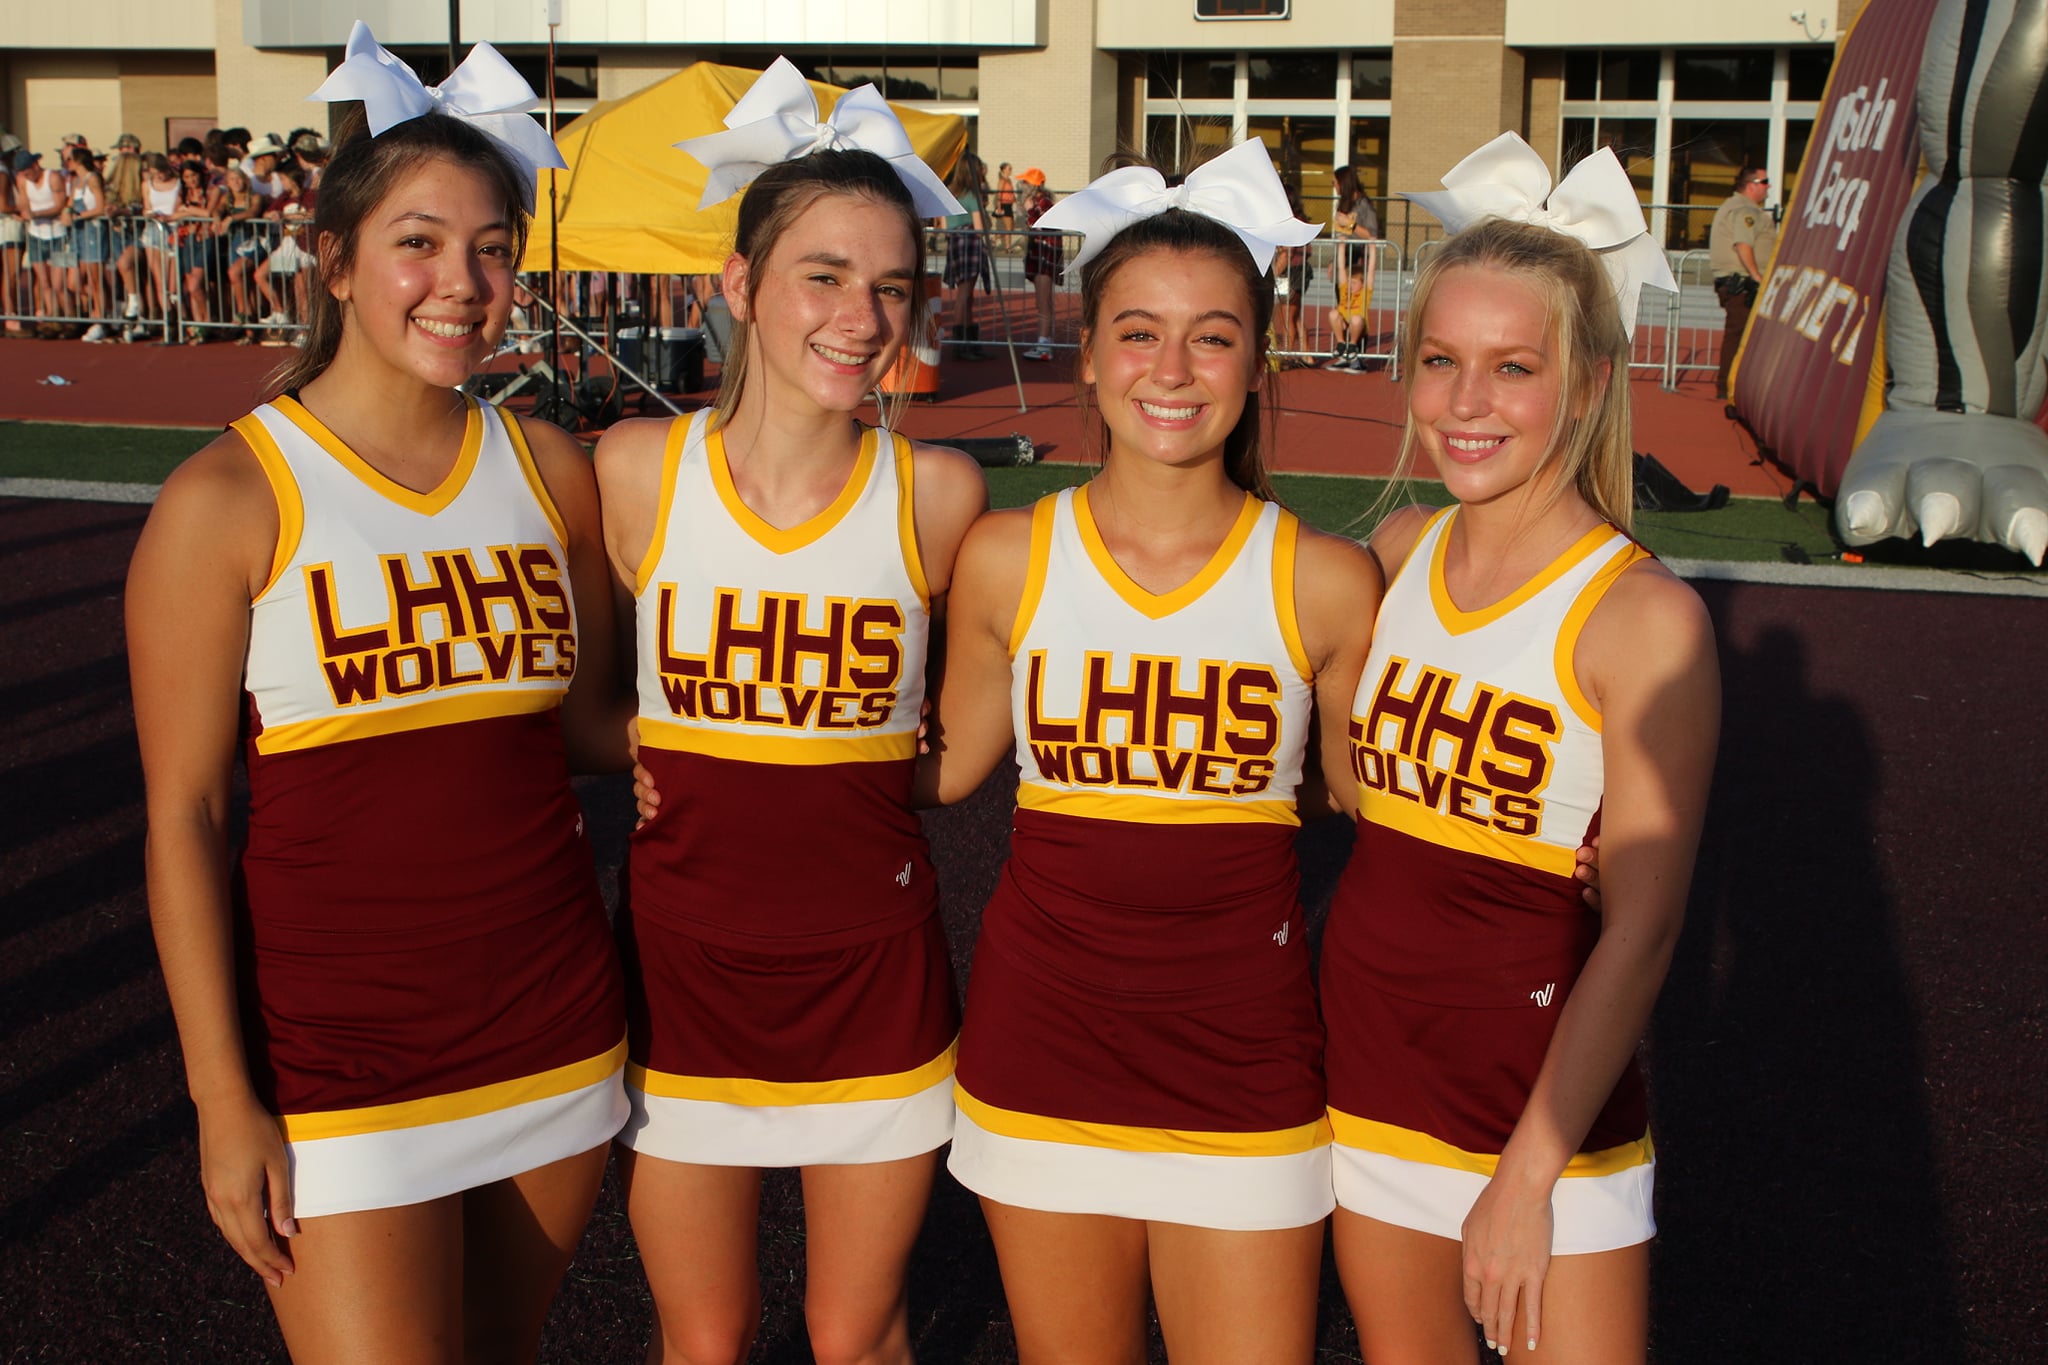 Cheerleaders ready for football game!